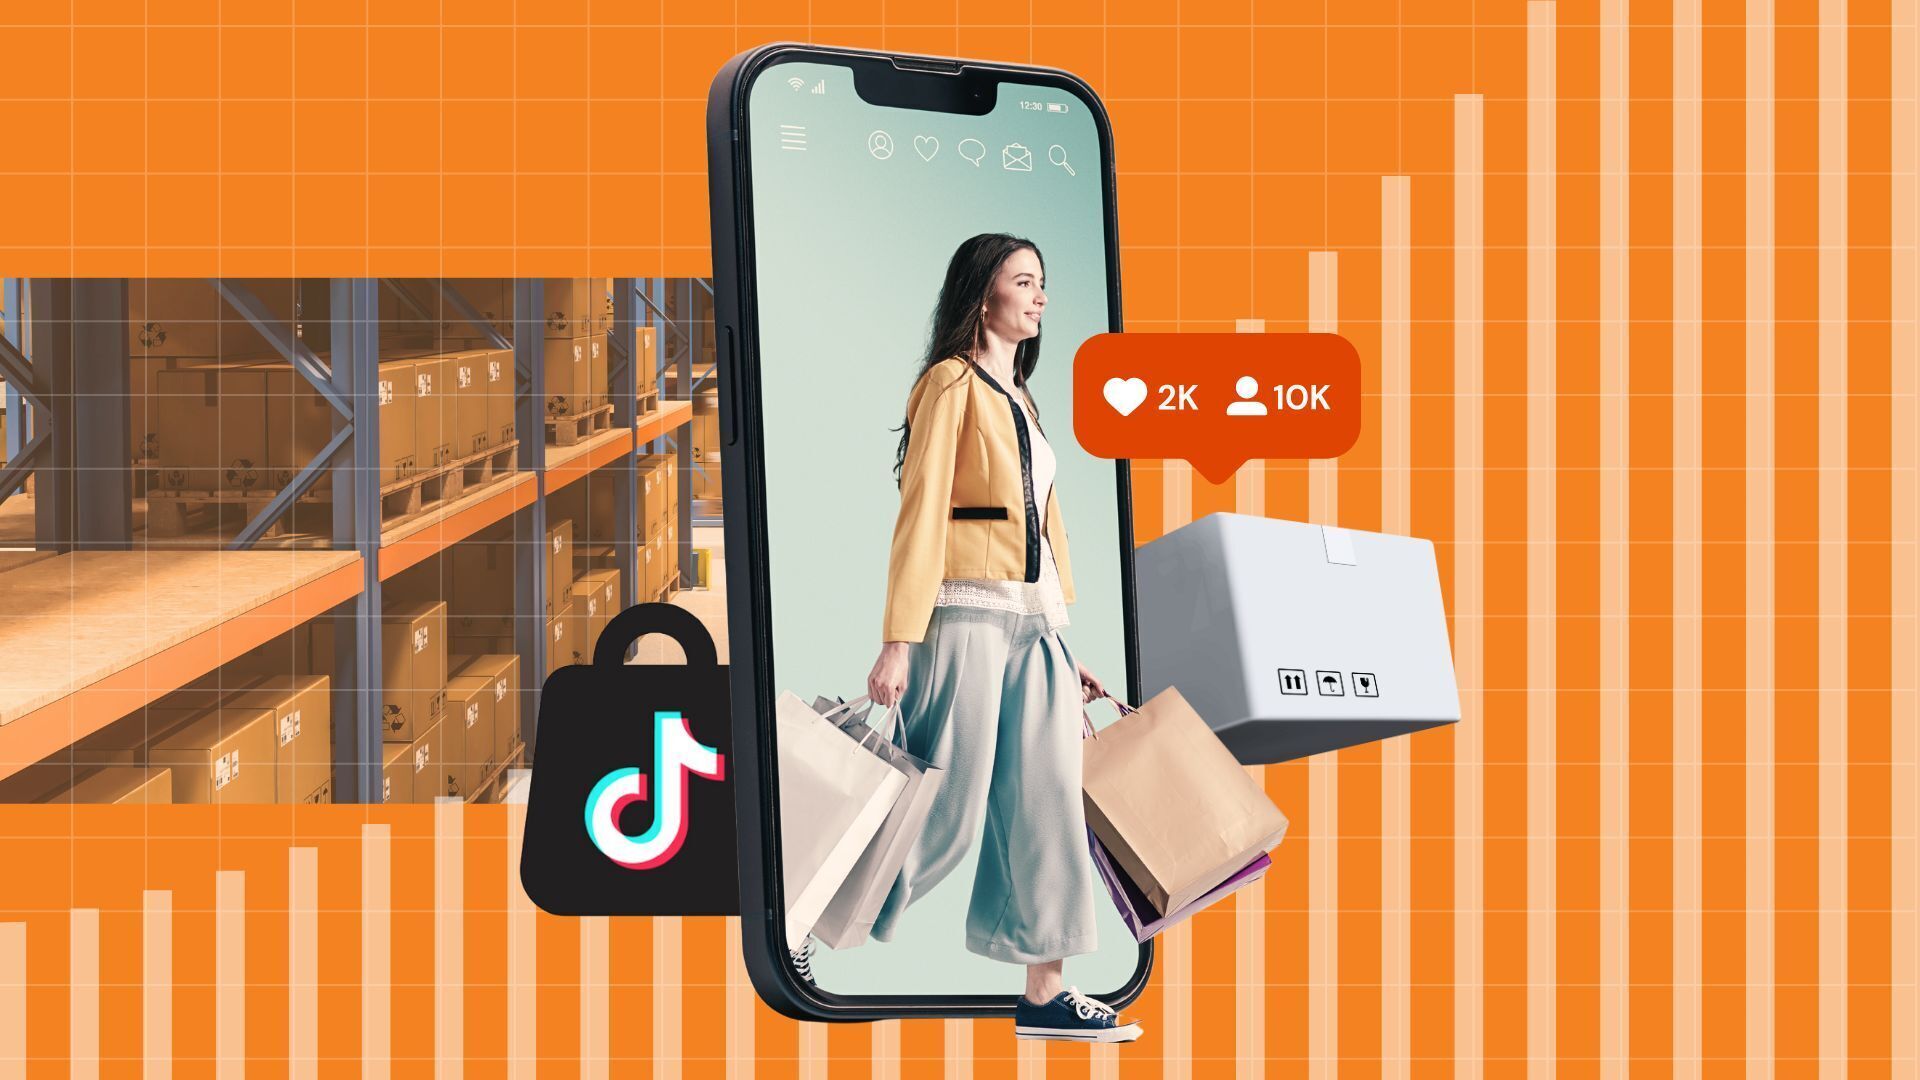 Adapting to Surges in Social Commerce: Efficient Fulfillment Strategies When Order Volume Increases by 200-300%